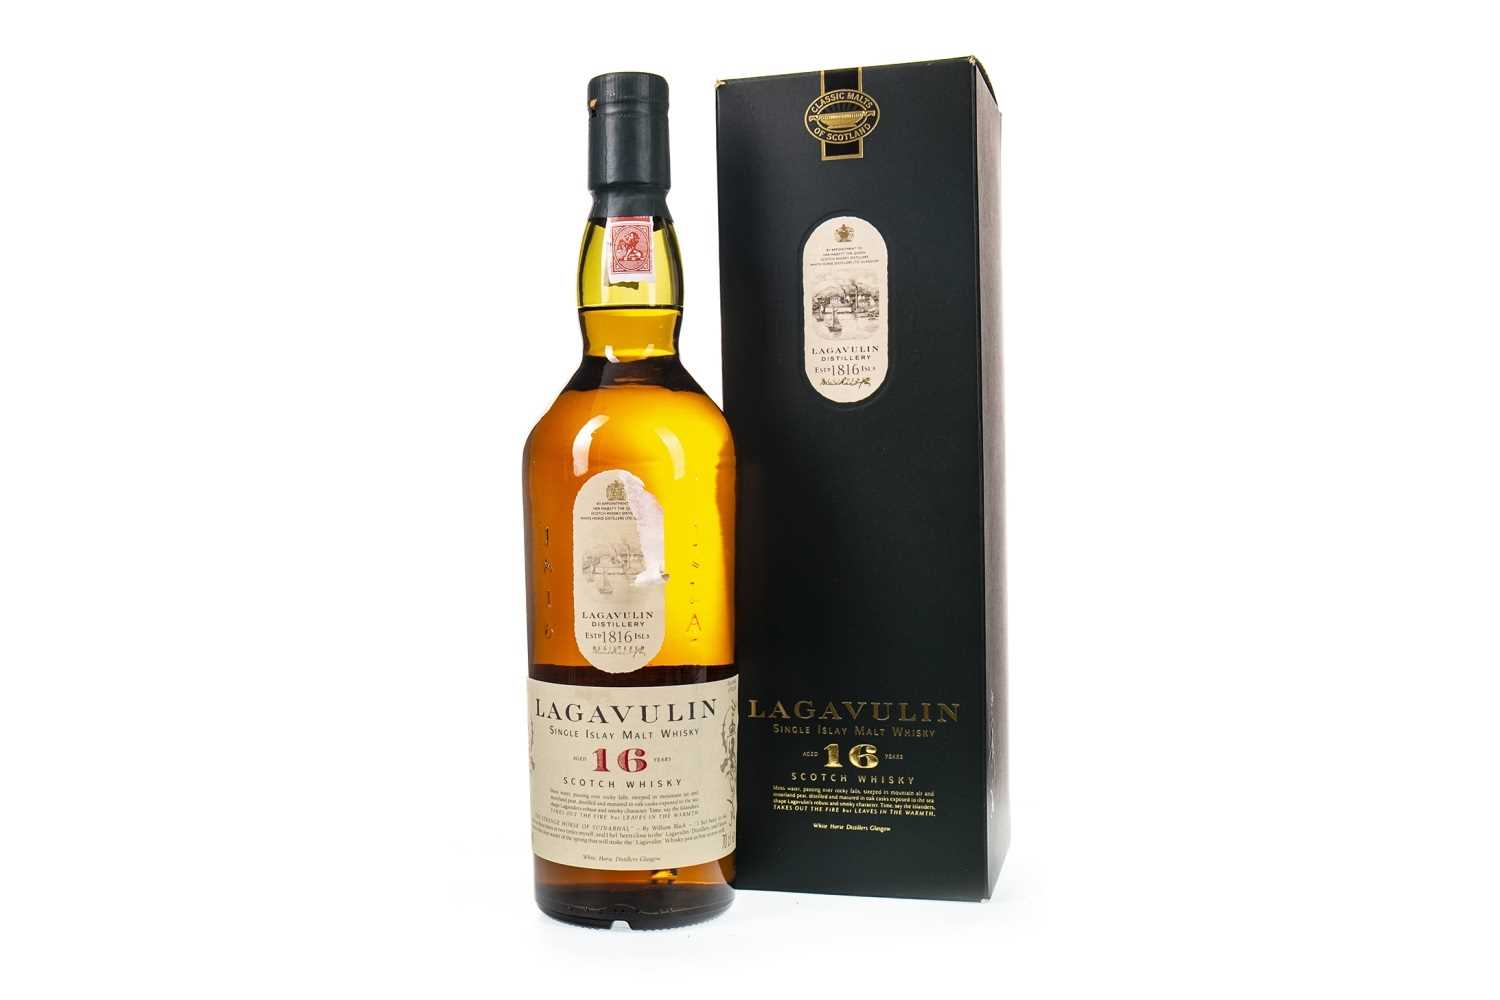 Lot 123 - LAGAVULIN AGED 16 YEARS WHITE HORSE DISTILLERS